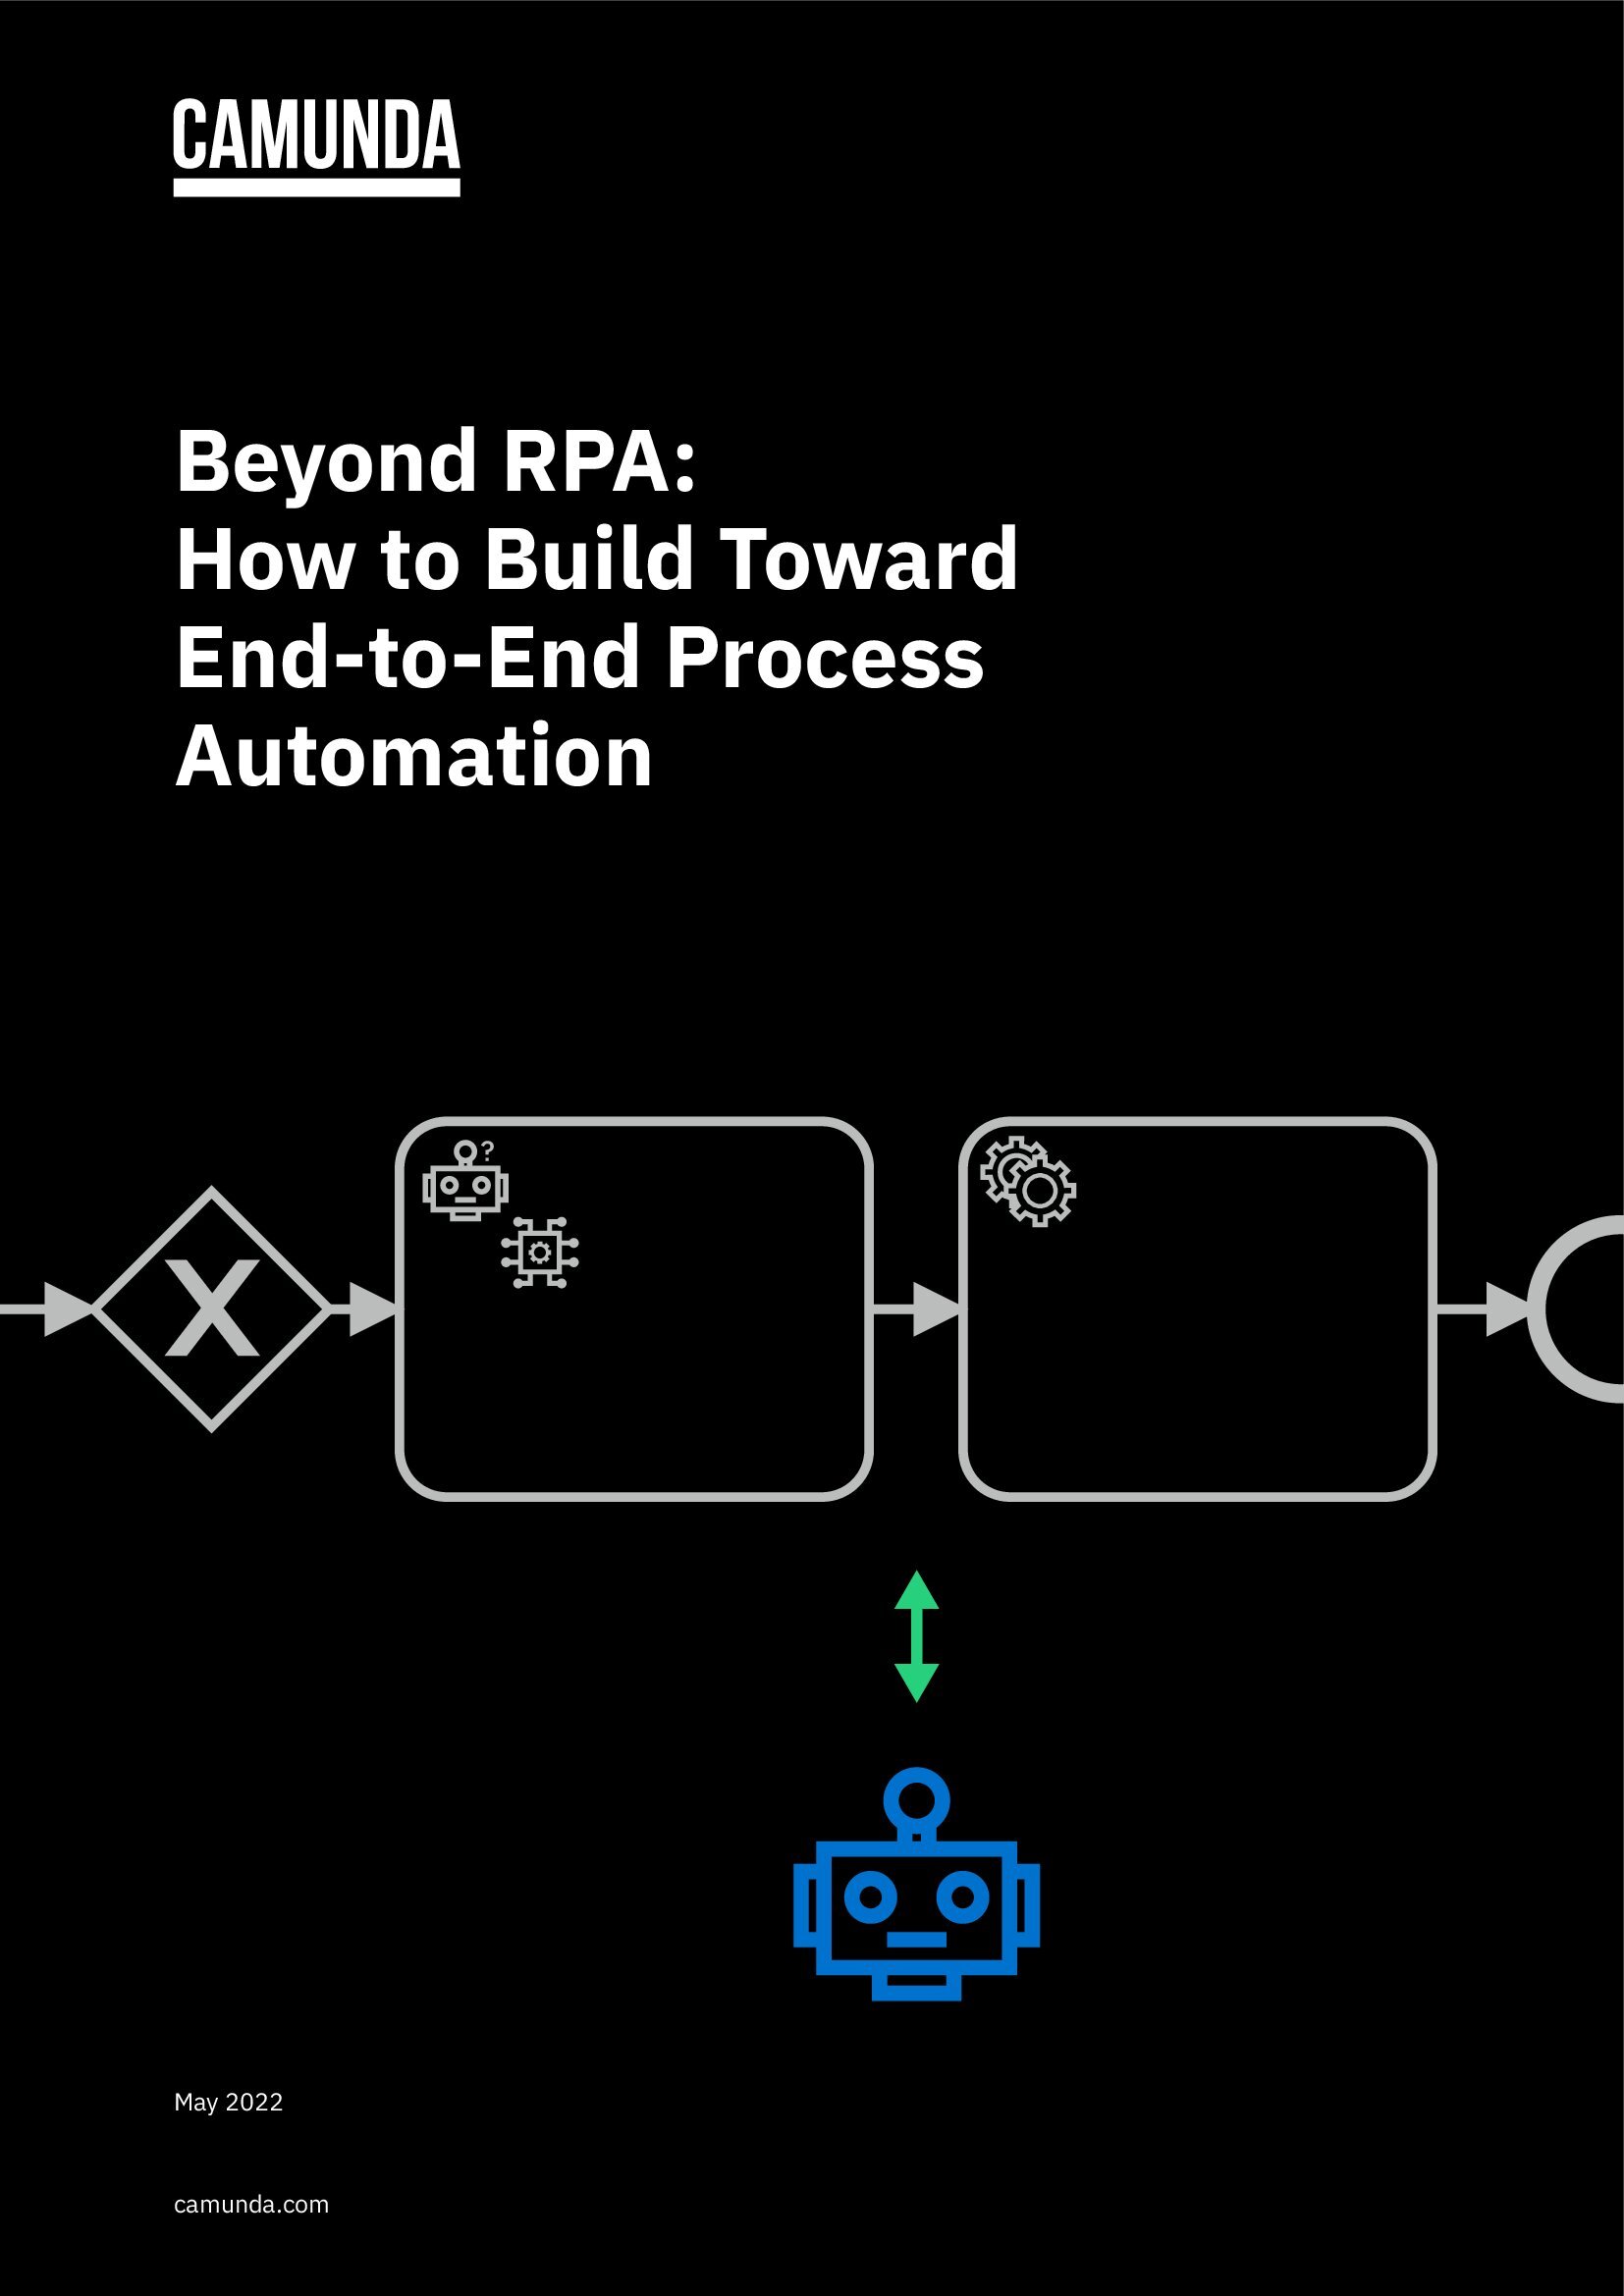 Beyond RPA: How to Build Toward End-to-end Process Automation